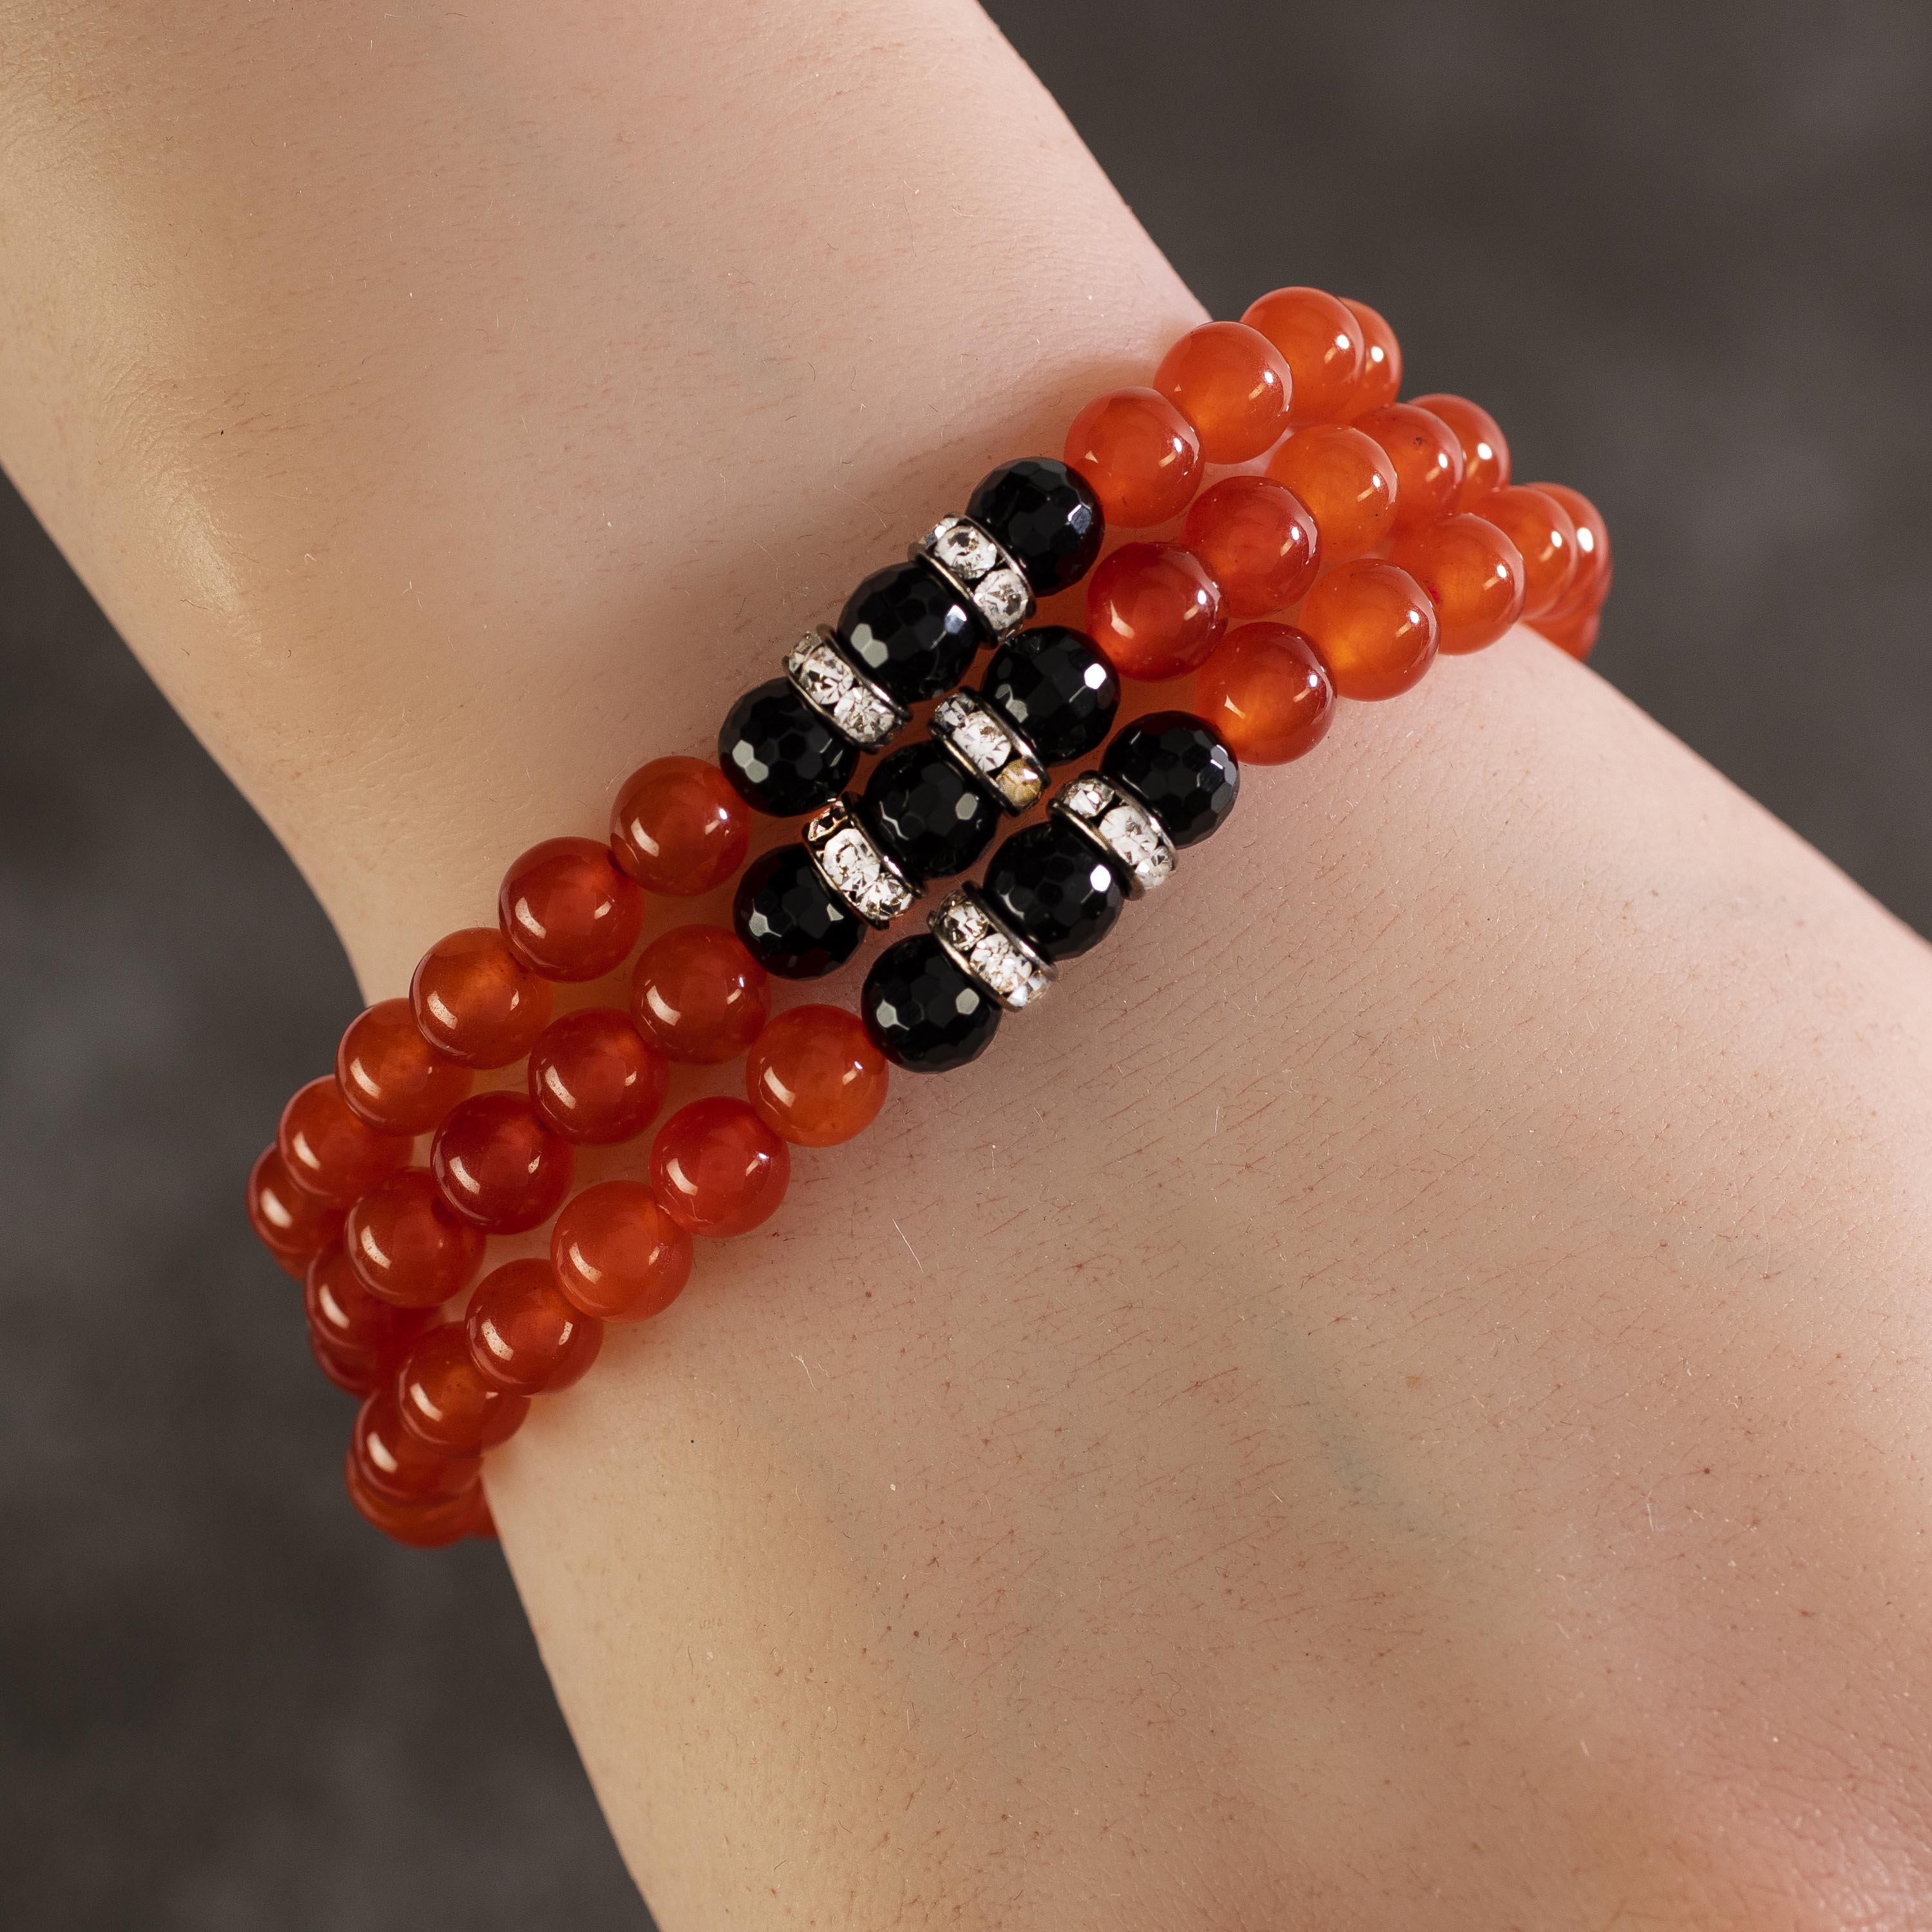 Kalifano Gemstone Bracelets Red Agate 6mm Beads with Black Agate and Silver Crystal Accent Beads Triple Wrap Elastic Gemstone Bracelet WHITE-BGI3-061